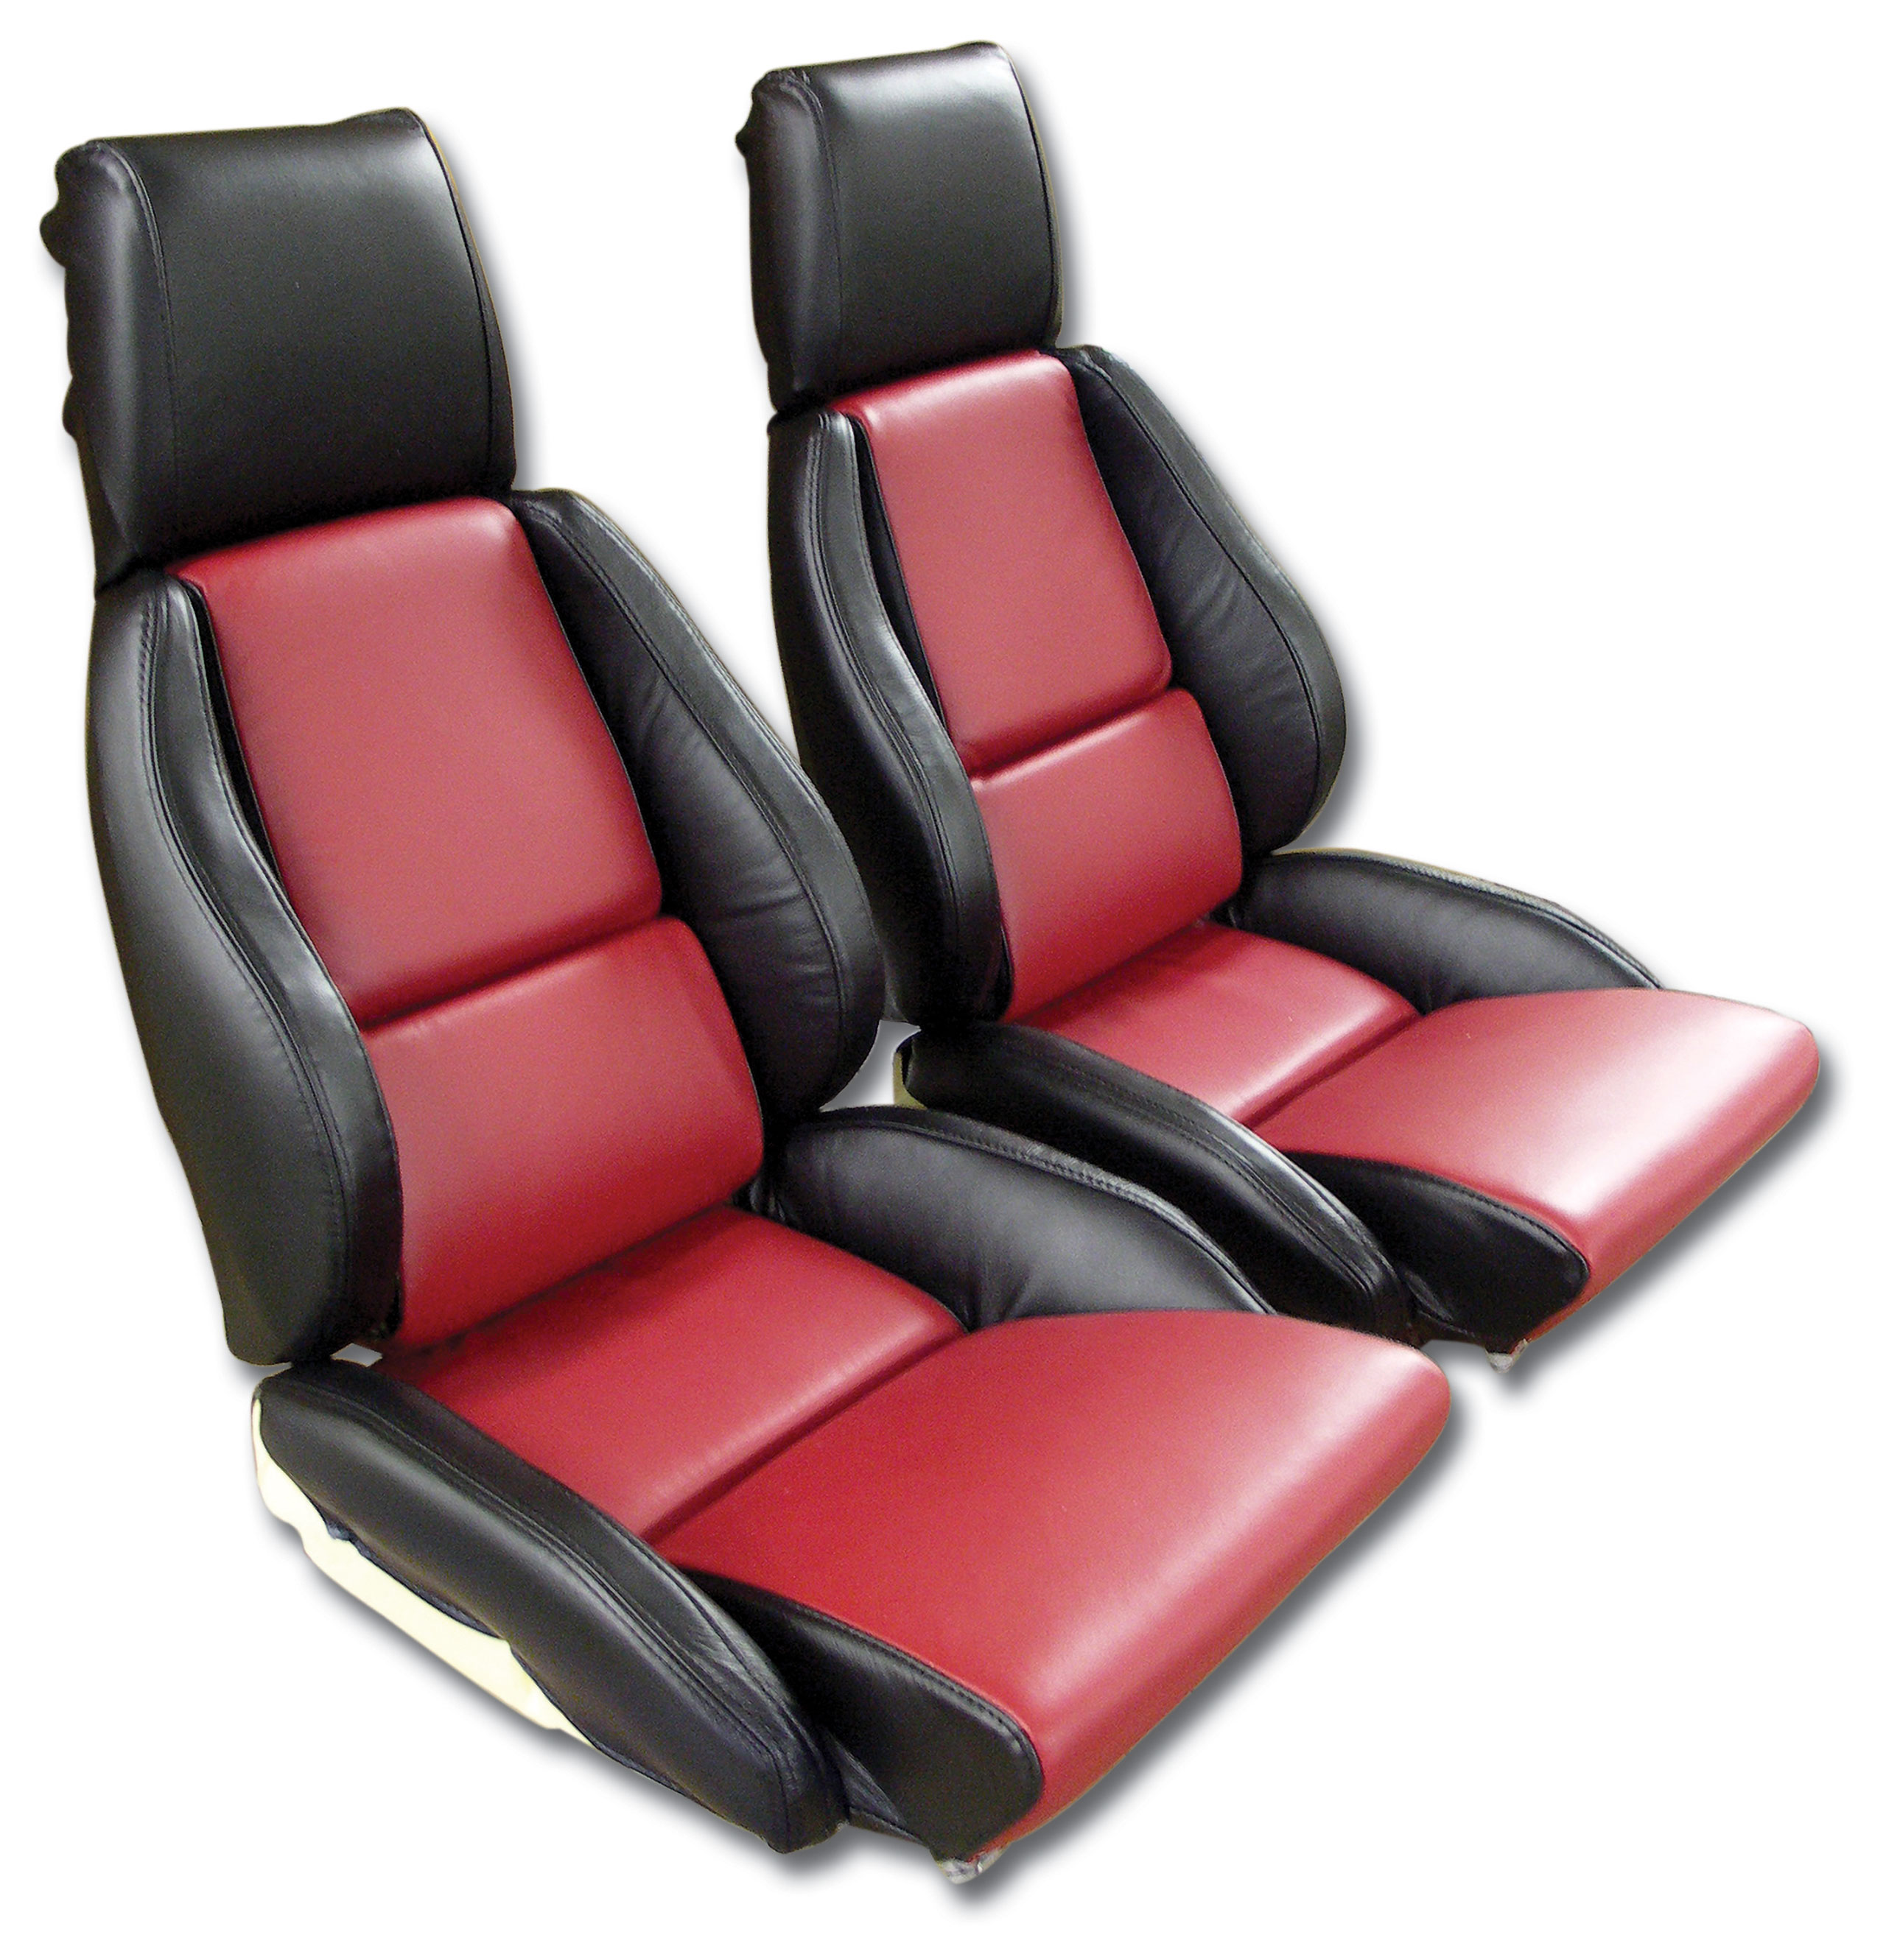 1986-1988 C4 Corvette Mounted 100% Leather Standard Seat Covers - Black /Red 2-Tone